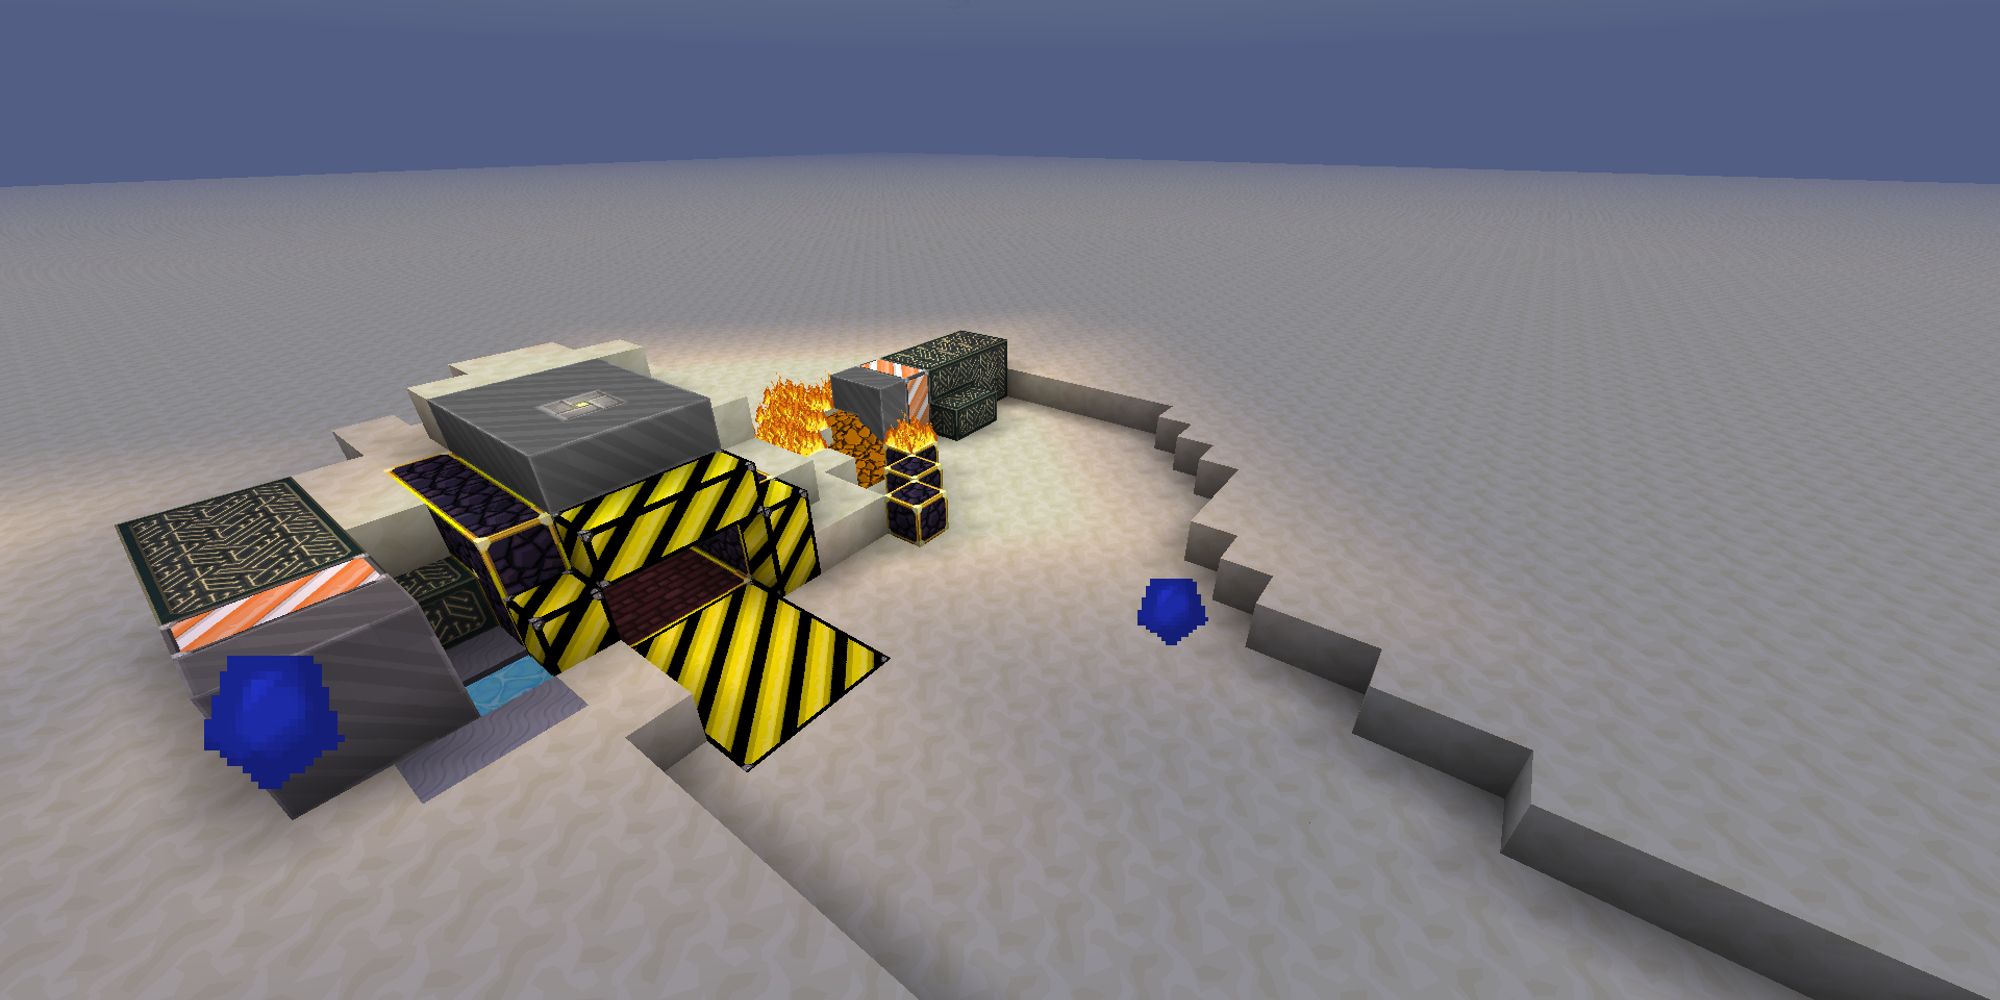 Minecraft Space Ship Crashed On Dusty Empty Terrain On Fire